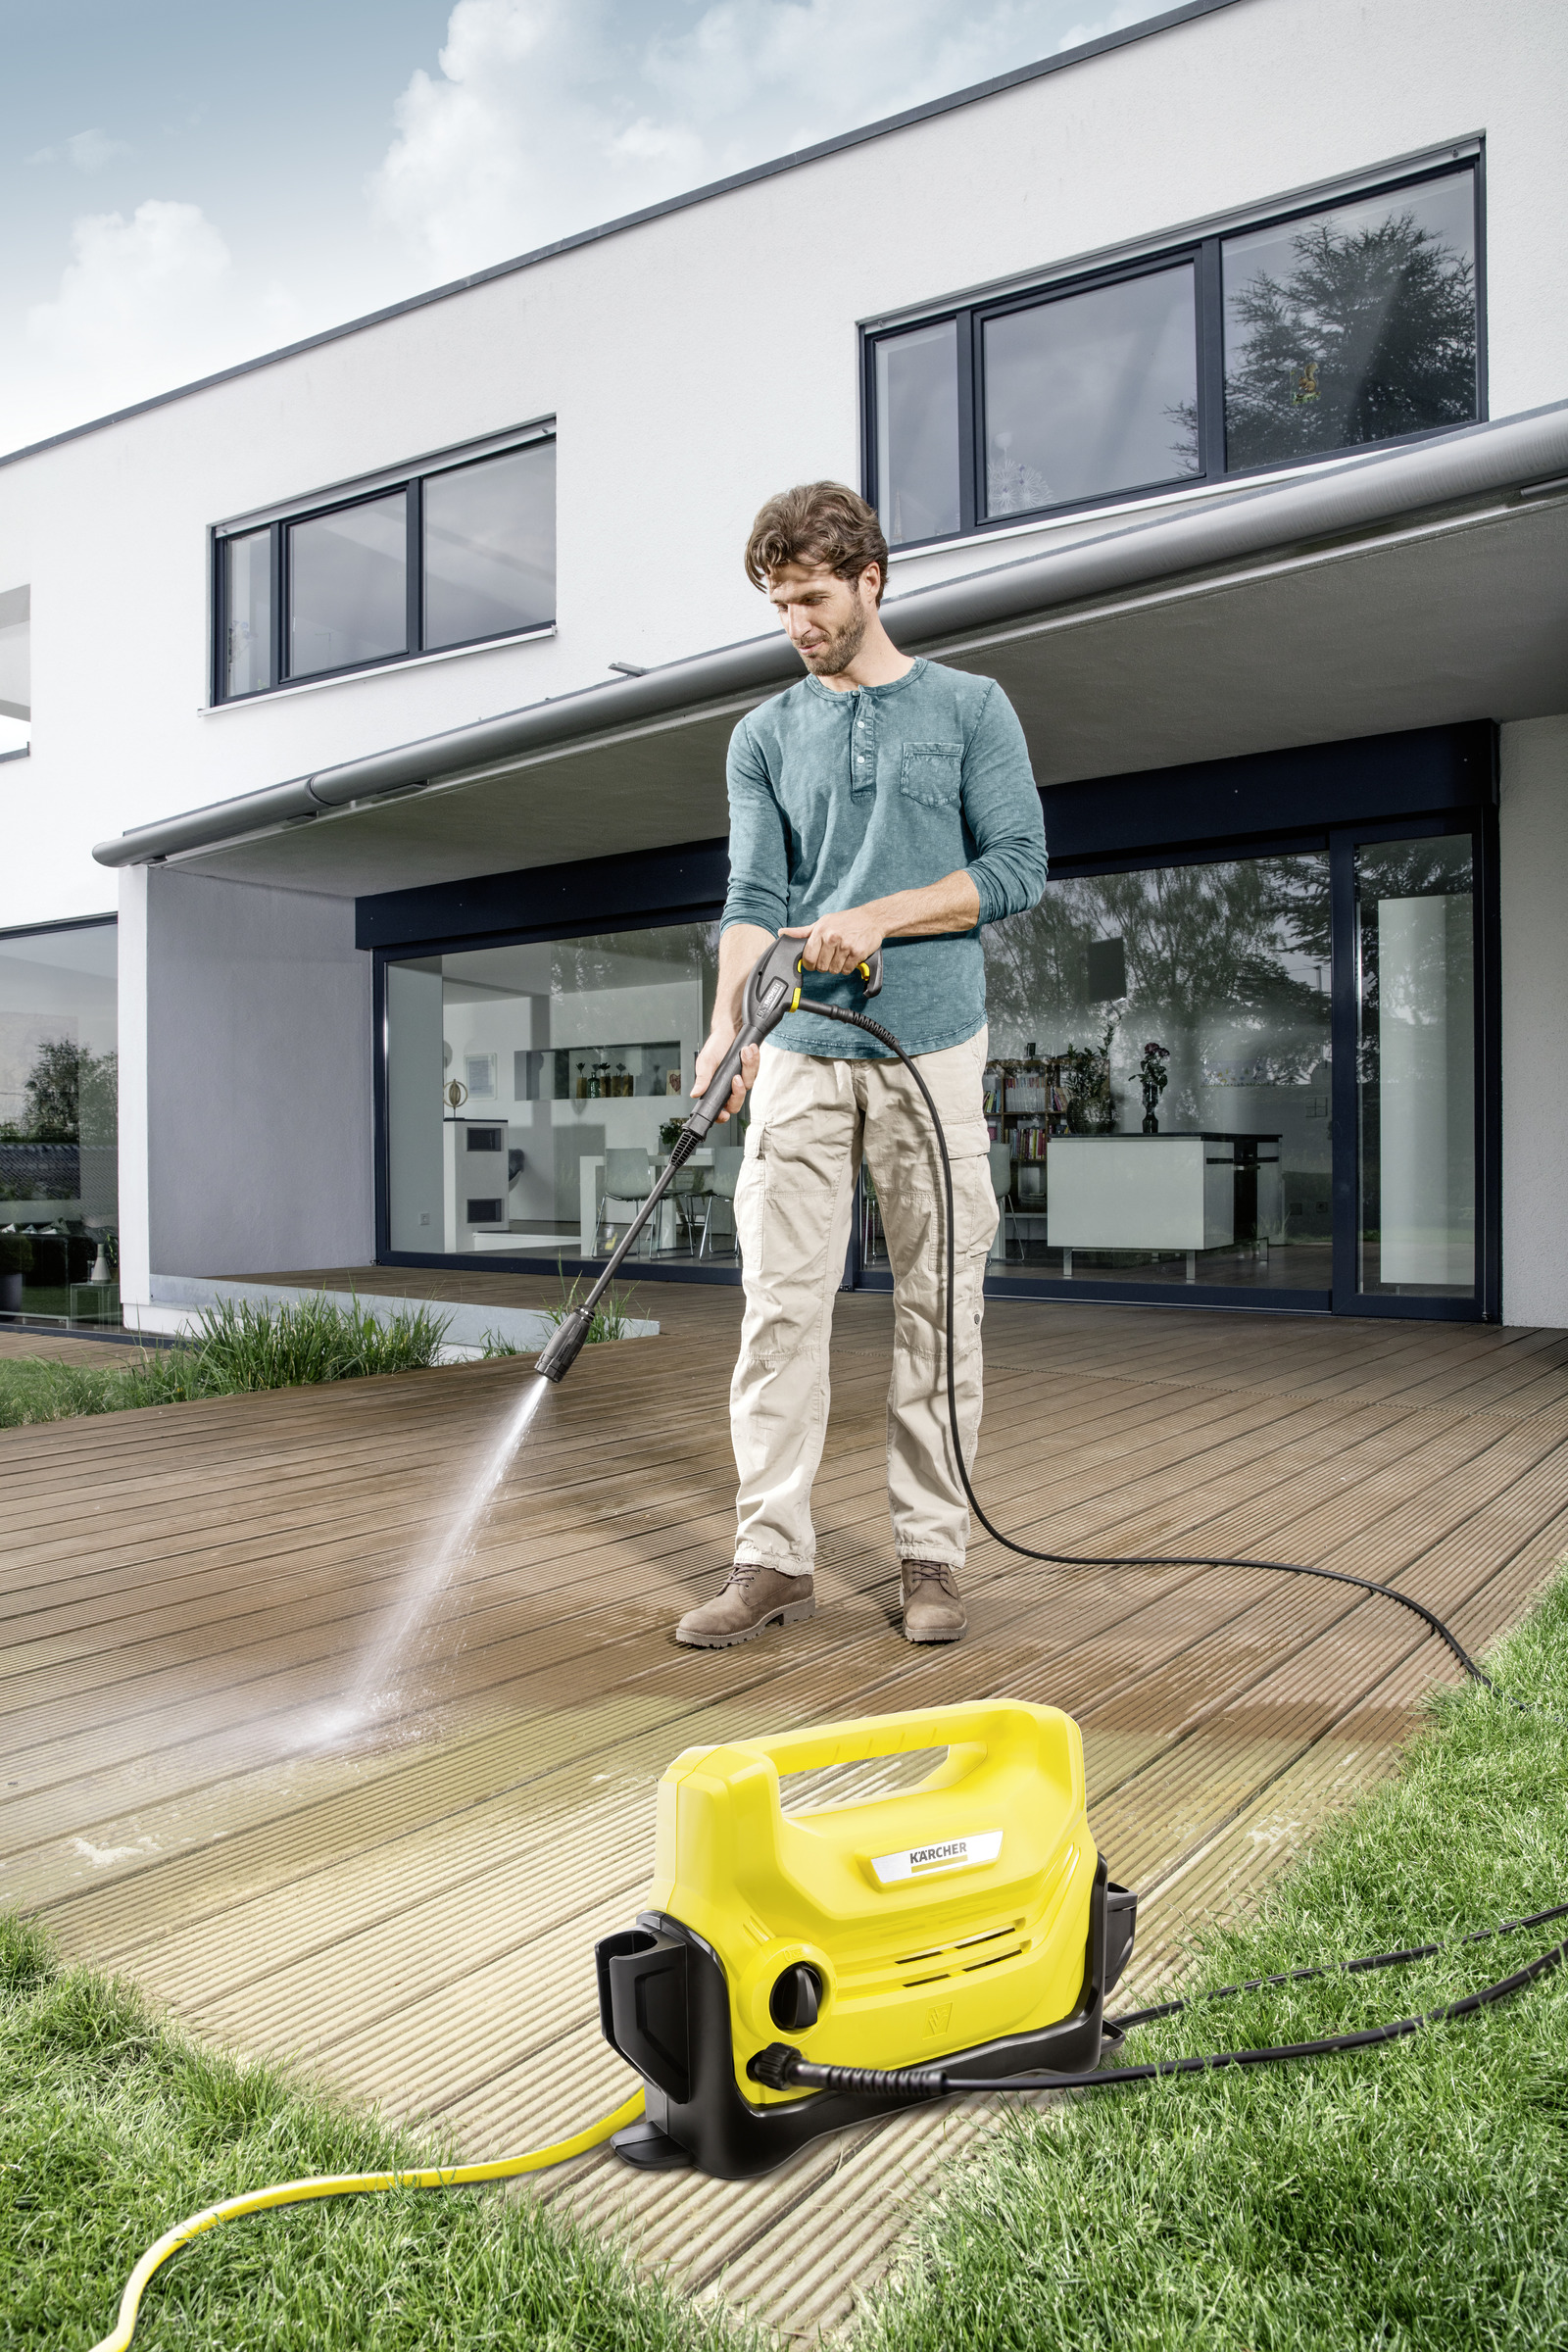 Is this Karcher K 2 Entry pressure washer any good? : r/AutoDetailing